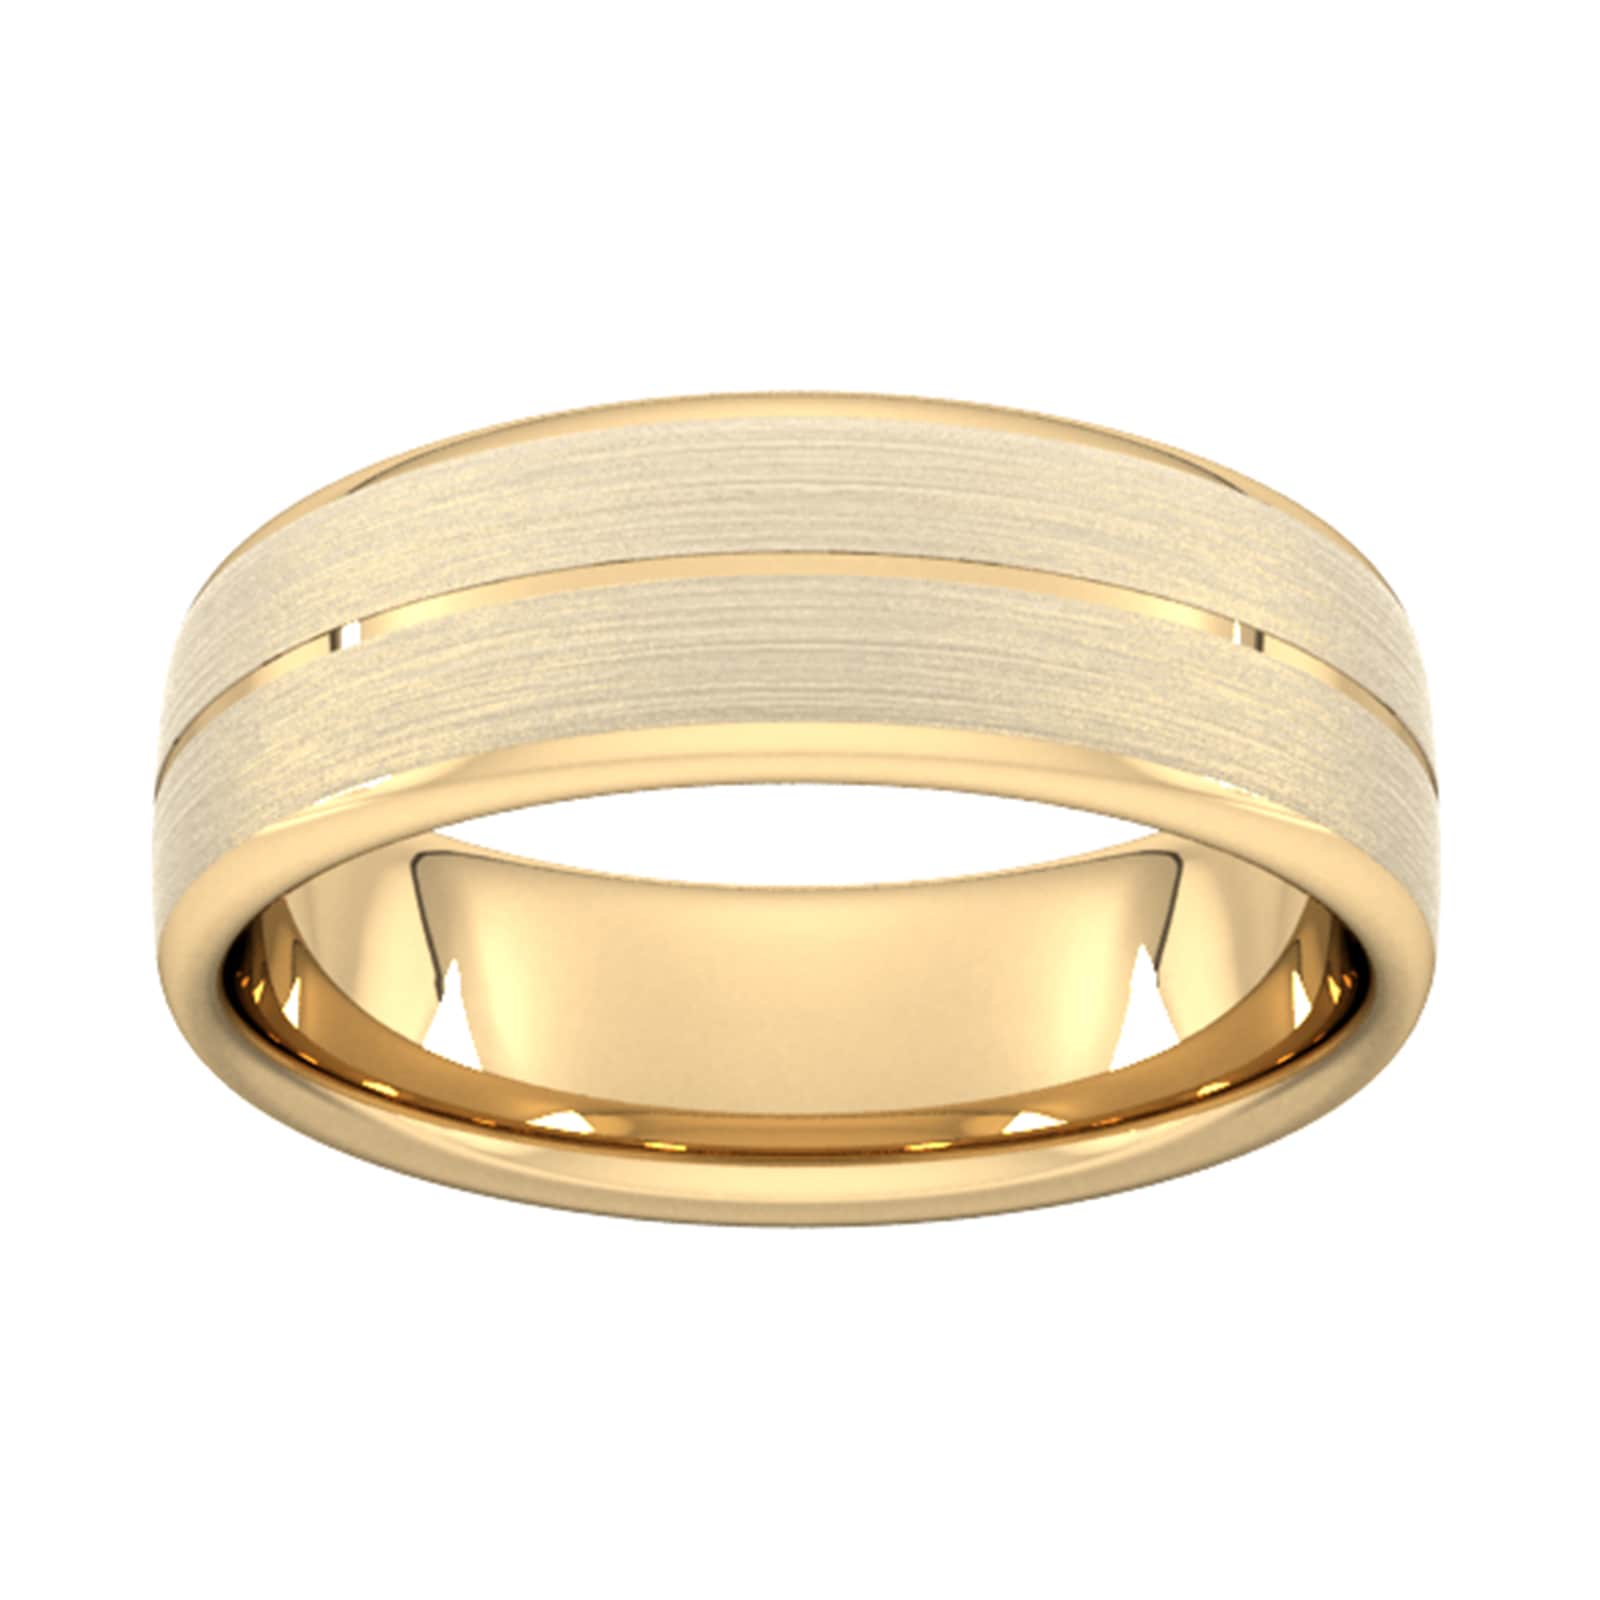 7mm Slight Court Standard Centre Groove With Chamfered Edge Wedding Ring In 18 Carat Yellow Gold - Ring Size R